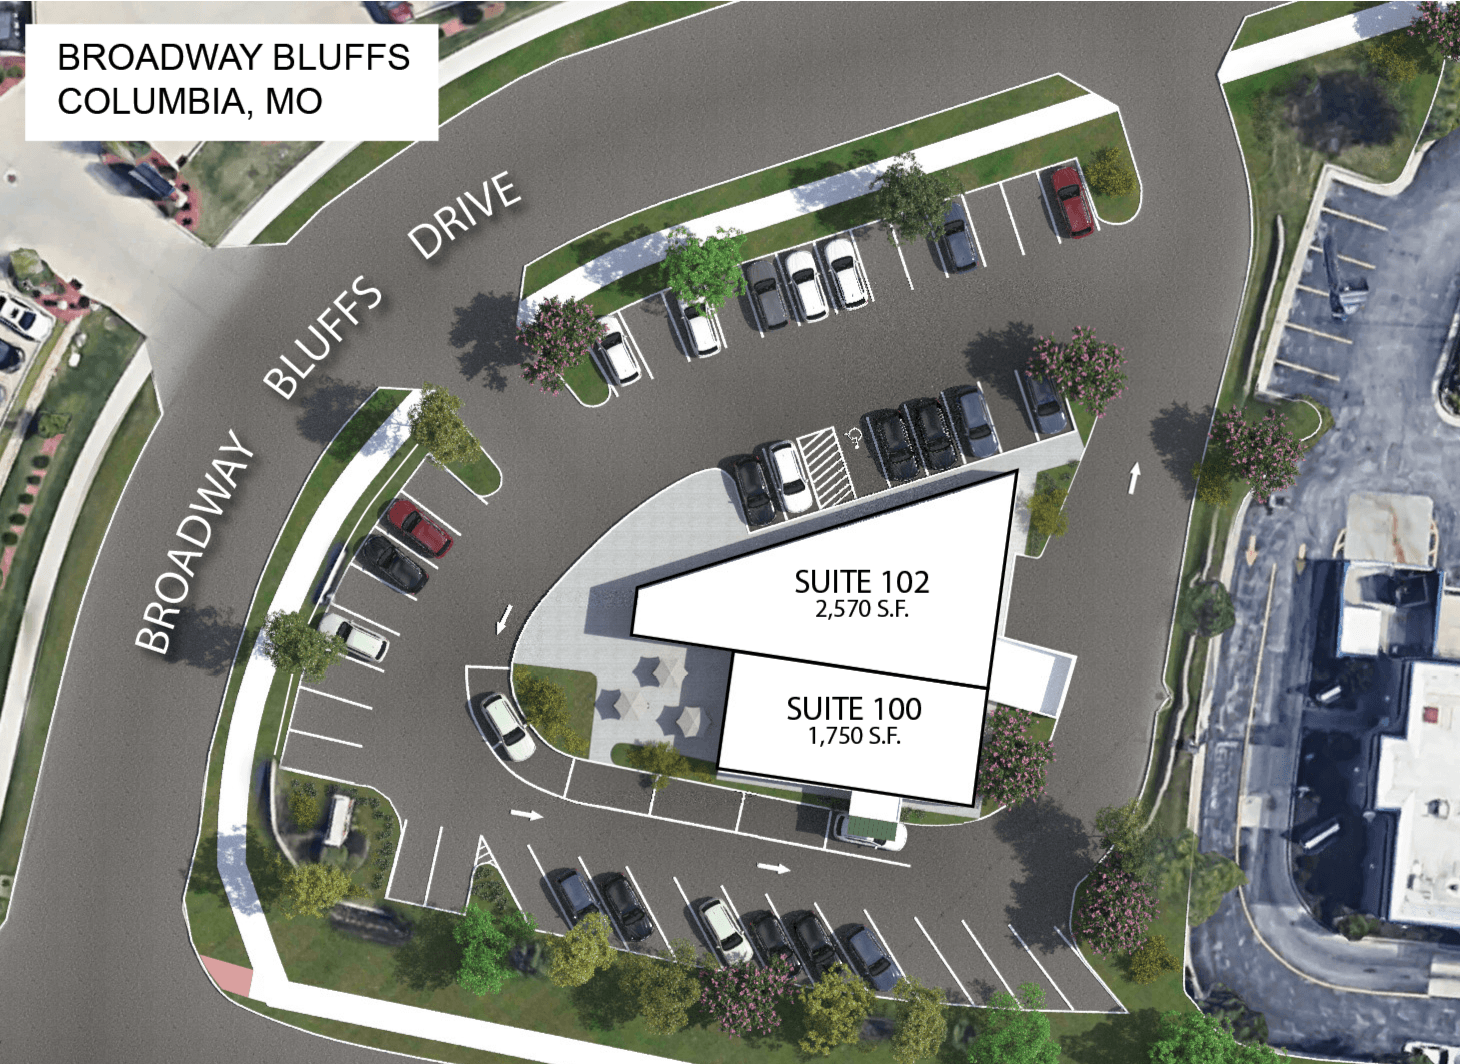 Broadway Bluffs Site Plan in Columbia, MO. Learn More at Lindner Properties.